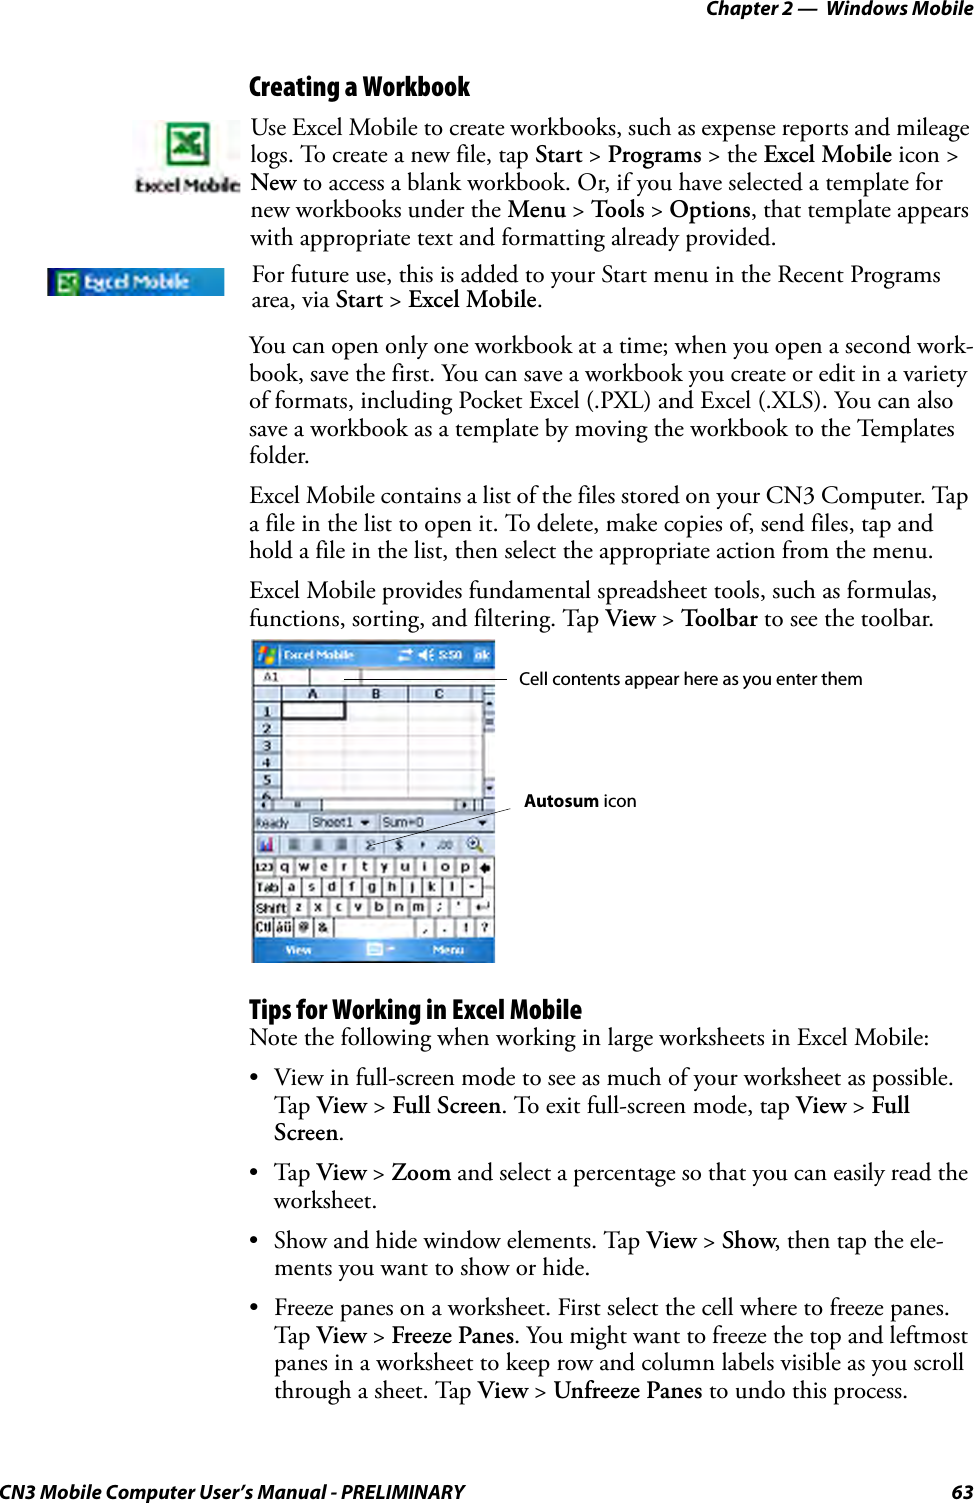 Chapter 2 —  Windows MobileCN3 Mobile Computer User’s Manual - PRELIMINARY 63Creating a WorkbookYou can open only one workbook at a time; when you open a second work-book, save the first. You can save a workbook you create or edit in a variety of formats, including Pocket Excel (.PXL) and Excel (.XLS). You can also save a workbook as a template by moving the workbook to the Templates folder.Excel Mobile contains a list of the files stored on your CN3 Computer. Tap a file in the list to open it. To delete, make copies of, send files, tap and hold a file in the list, then select the appropriate action from the menu.Excel Mobile provides fundamental spreadsheet tools, such as formulas, functions, sorting, and filtering. Tap View &gt; Toolbar to see the toolbar.Tips for Working in Excel MobileNote the following when working in large worksheets in Excel Mobile:• View in full-screen mode to see as much of your worksheet as possible. Tap View &gt; Full Screen. To exit full-screen mode, tap View &gt; Full Screen.•Tap View &gt; Zoom and select a percentage so that you can easily read the worksheet.• Show and hide window elements. Tap View &gt; Show, then tap the ele-ments you want to show or hide.• Freeze panes on a worksheet. First select the cell where to freeze panes. Tap View &gt; Freeze Panes. You might want to freeze the top and leftmost panes in a worksheet to keep row and column labels visible as you scroll through a sheet. Tap View &gt; Unfreeze Panes to undo this process.Use Excel Mobile to create workbooks, such as expense reports and mileage logs. To create a new file, tap Start &gt; Programs &gt; the Excel Mobile icon &gt; New to access a blank workbook. Or, if you have selected a template for new workbooks under the Menu &gt; To o l s  &gt; Options, that template appears with appropriate text and formatting already provided.For future use, this is added to your Start menu in the Recent Programs area, via Start &gt; Excel Mobile. Cell contents appear here as you enter themAutosum icon